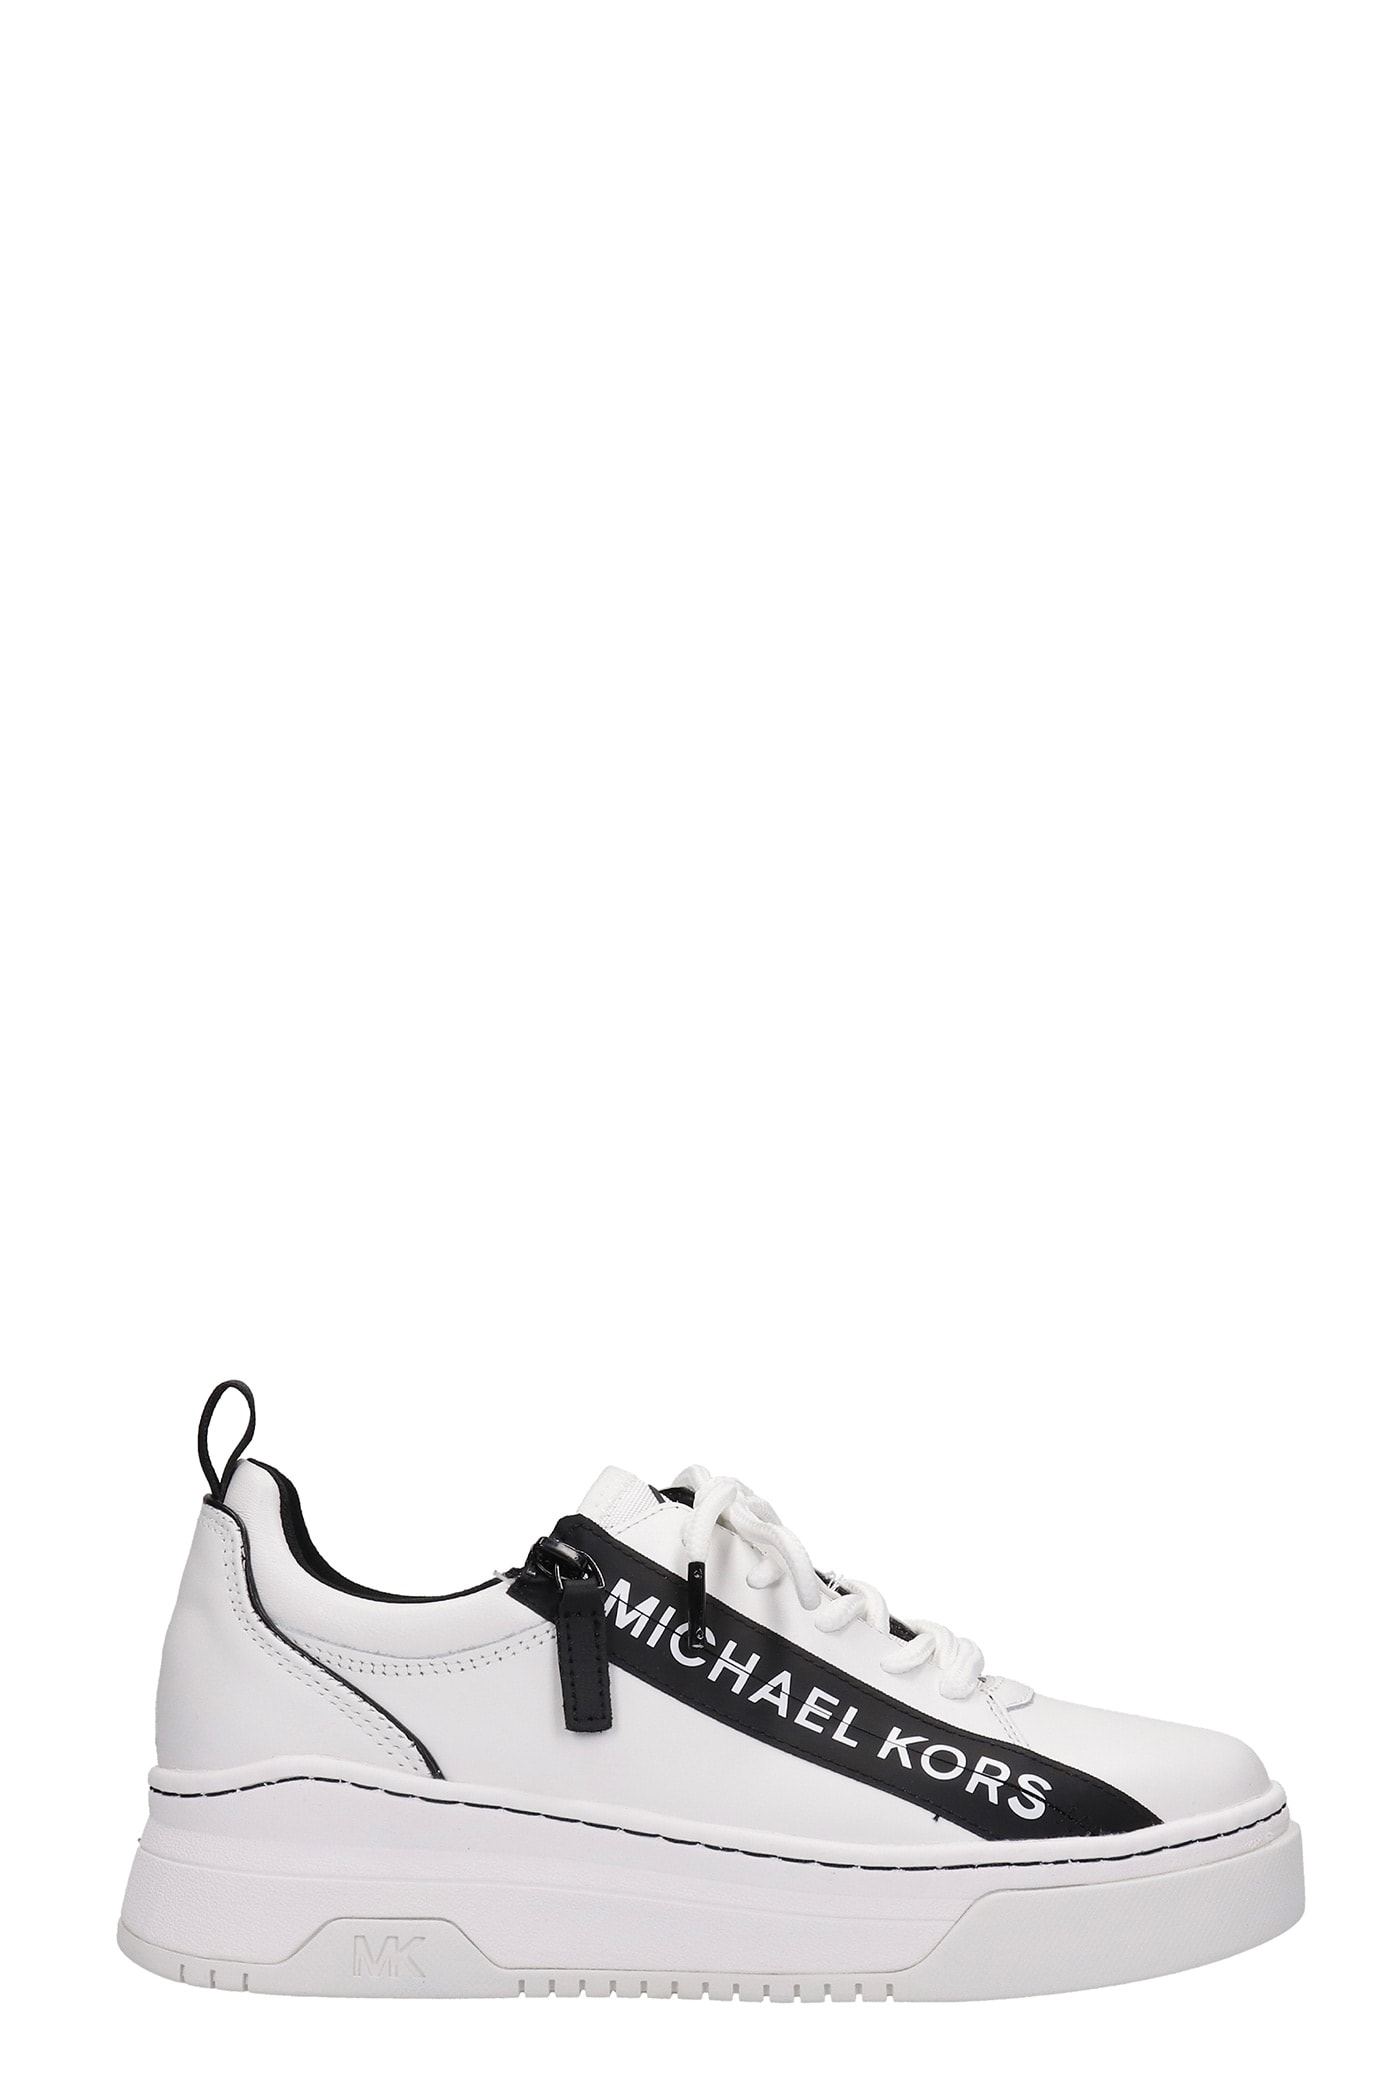 Michael Kors Alex Sneakers In White Leather